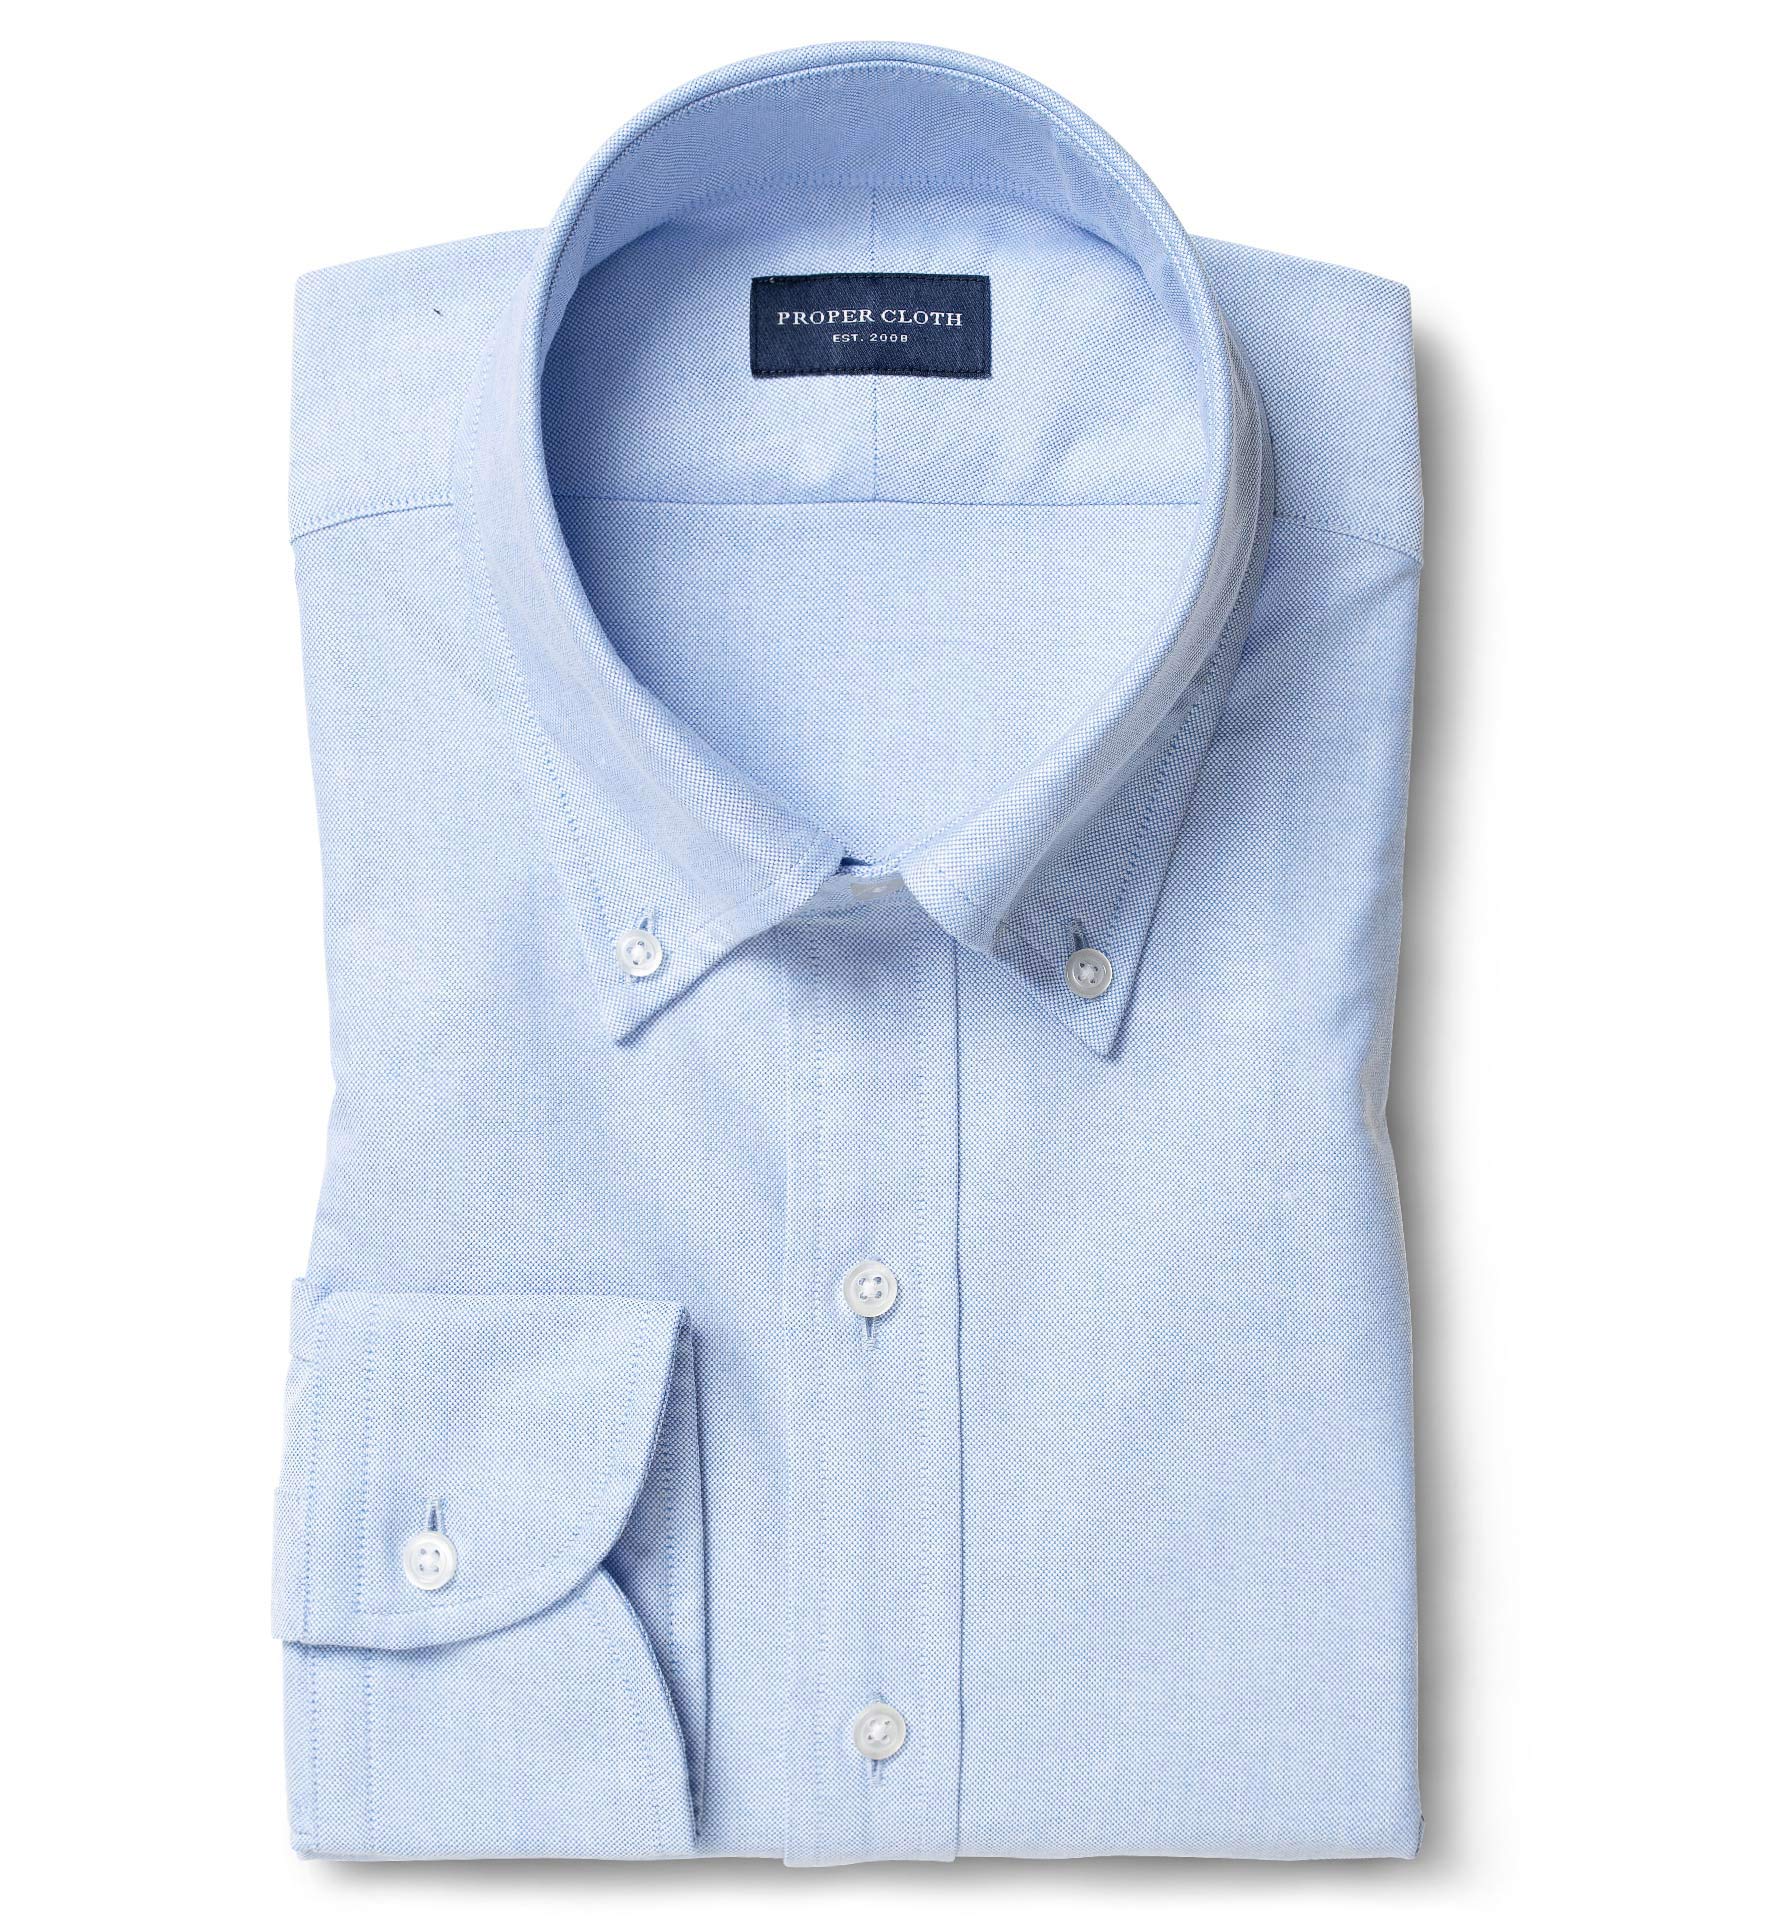 Alabama thespian Wreck Light Blue Oxford Cloth Fitted Shirt Shirt by Proper Cloth